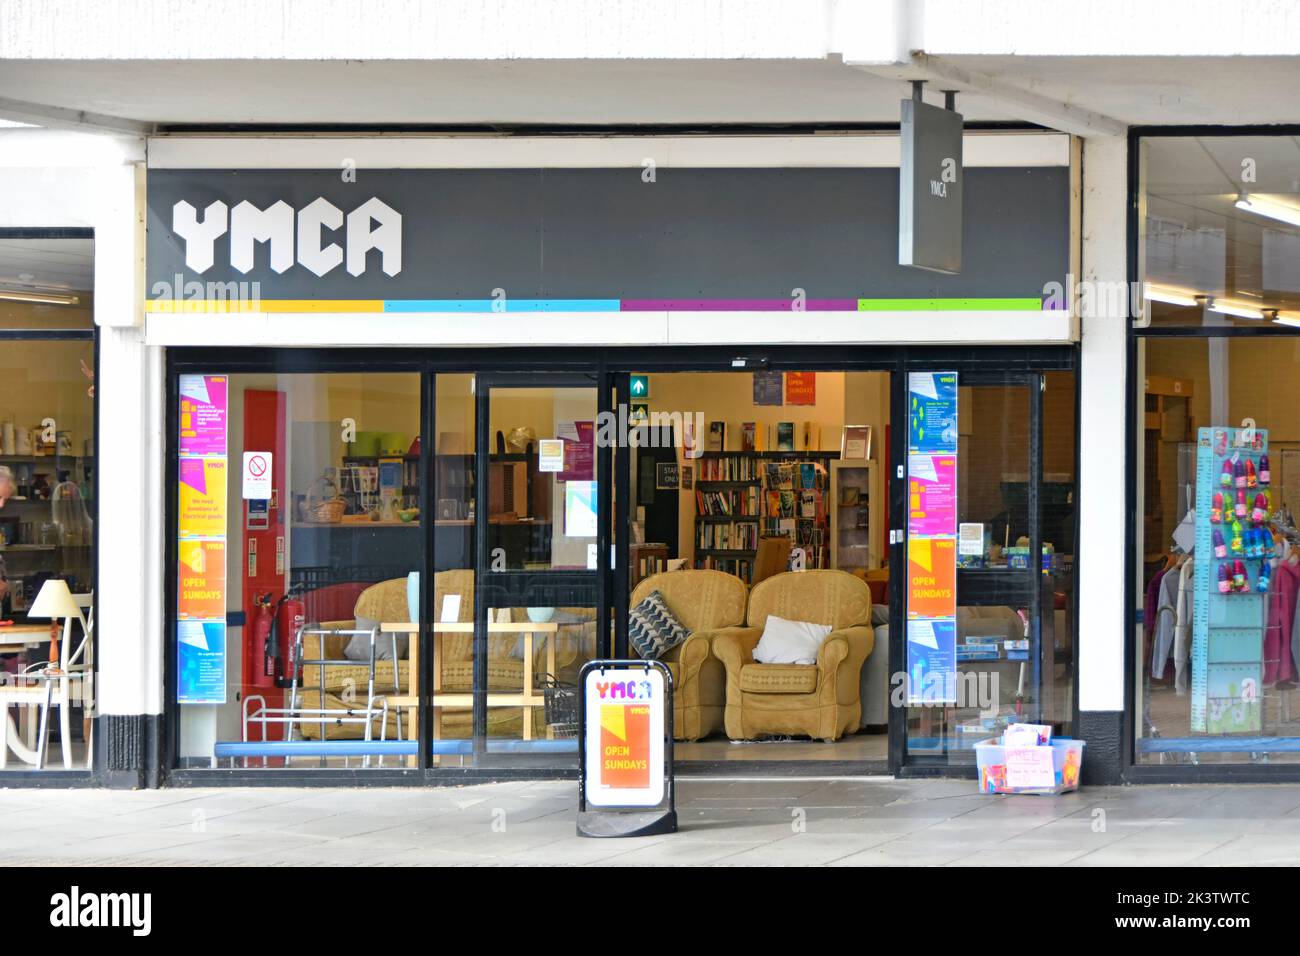 YMCA Young Men's Christian Association fund raising charity shop sells donated domestic merchandise outdoor shopping centre in Witham Essex England UK Stock Photo